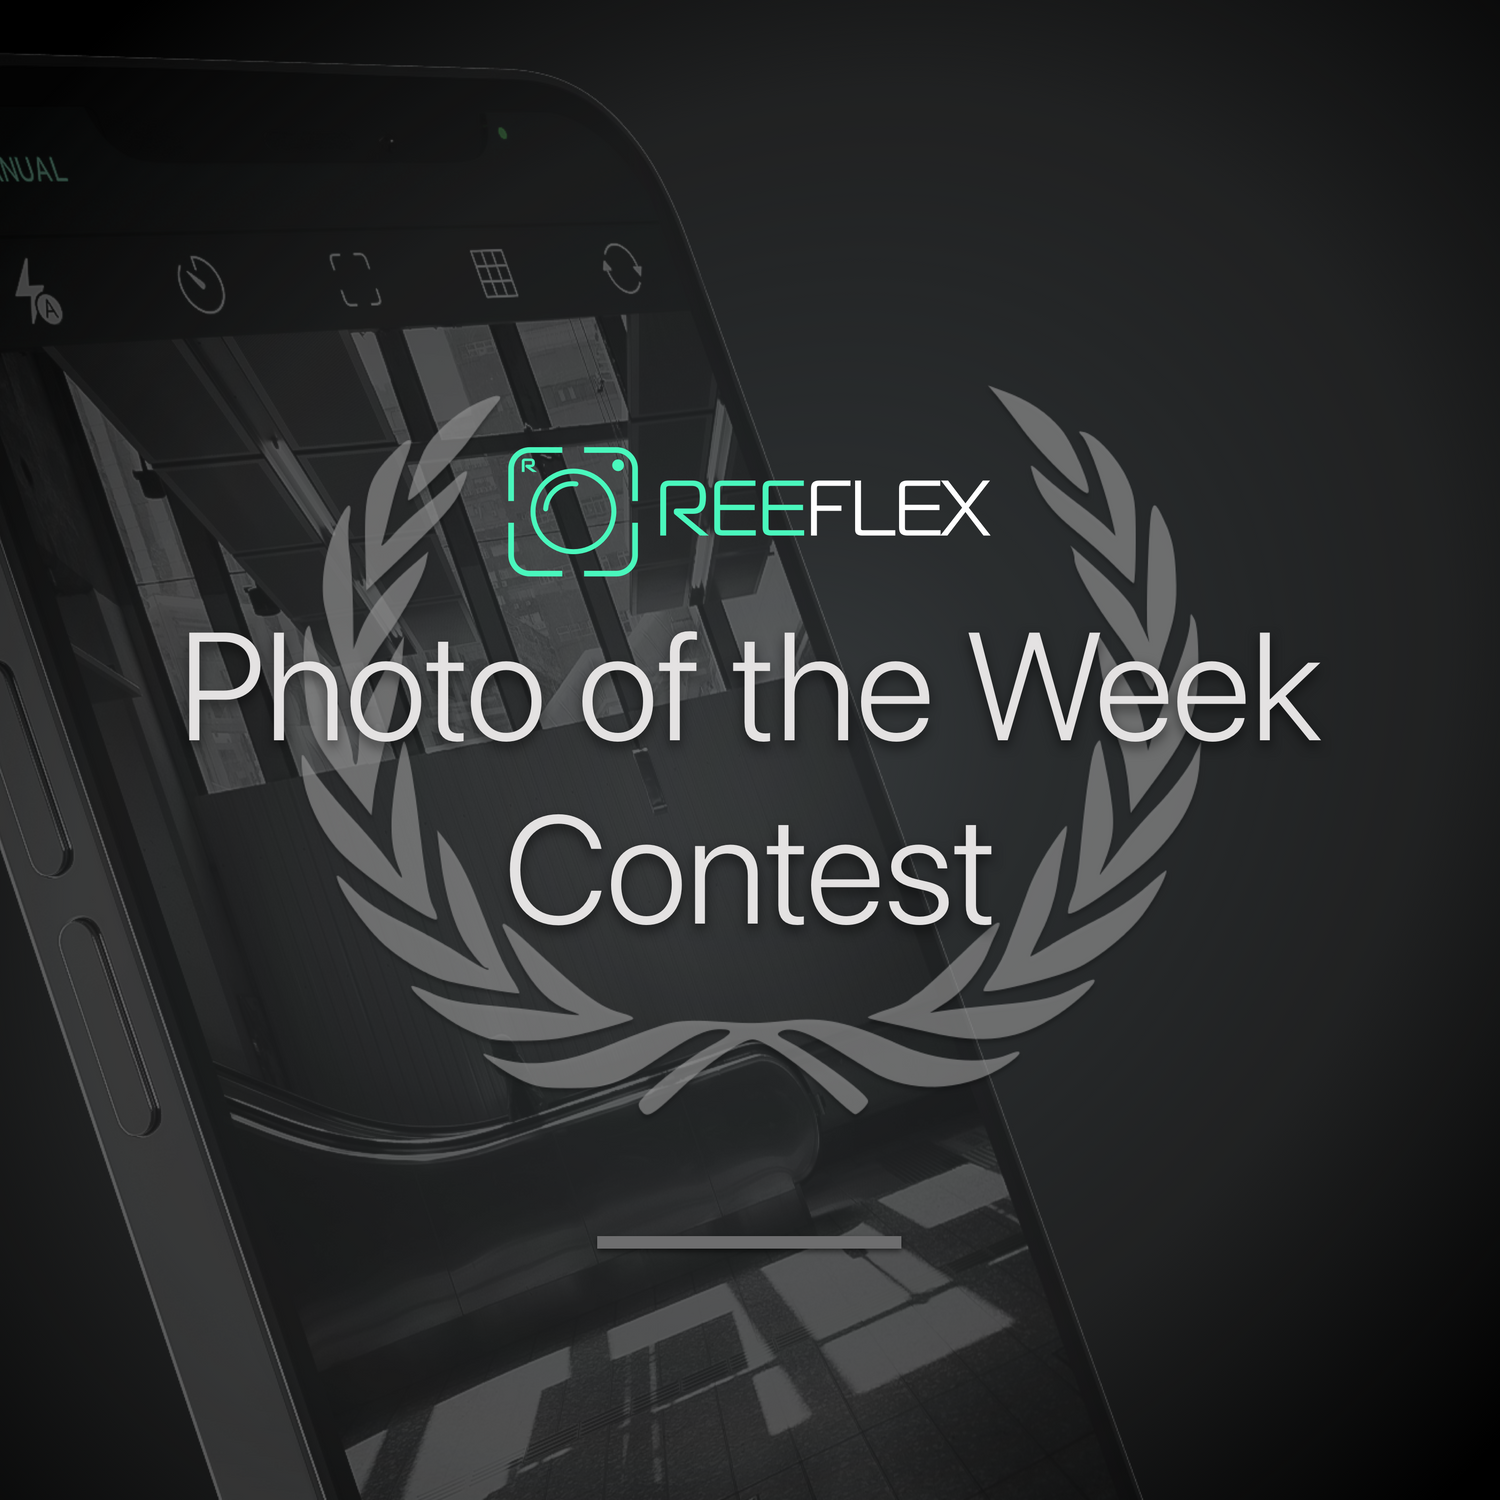 Launching 'Photo of the Week" Contest 🏆